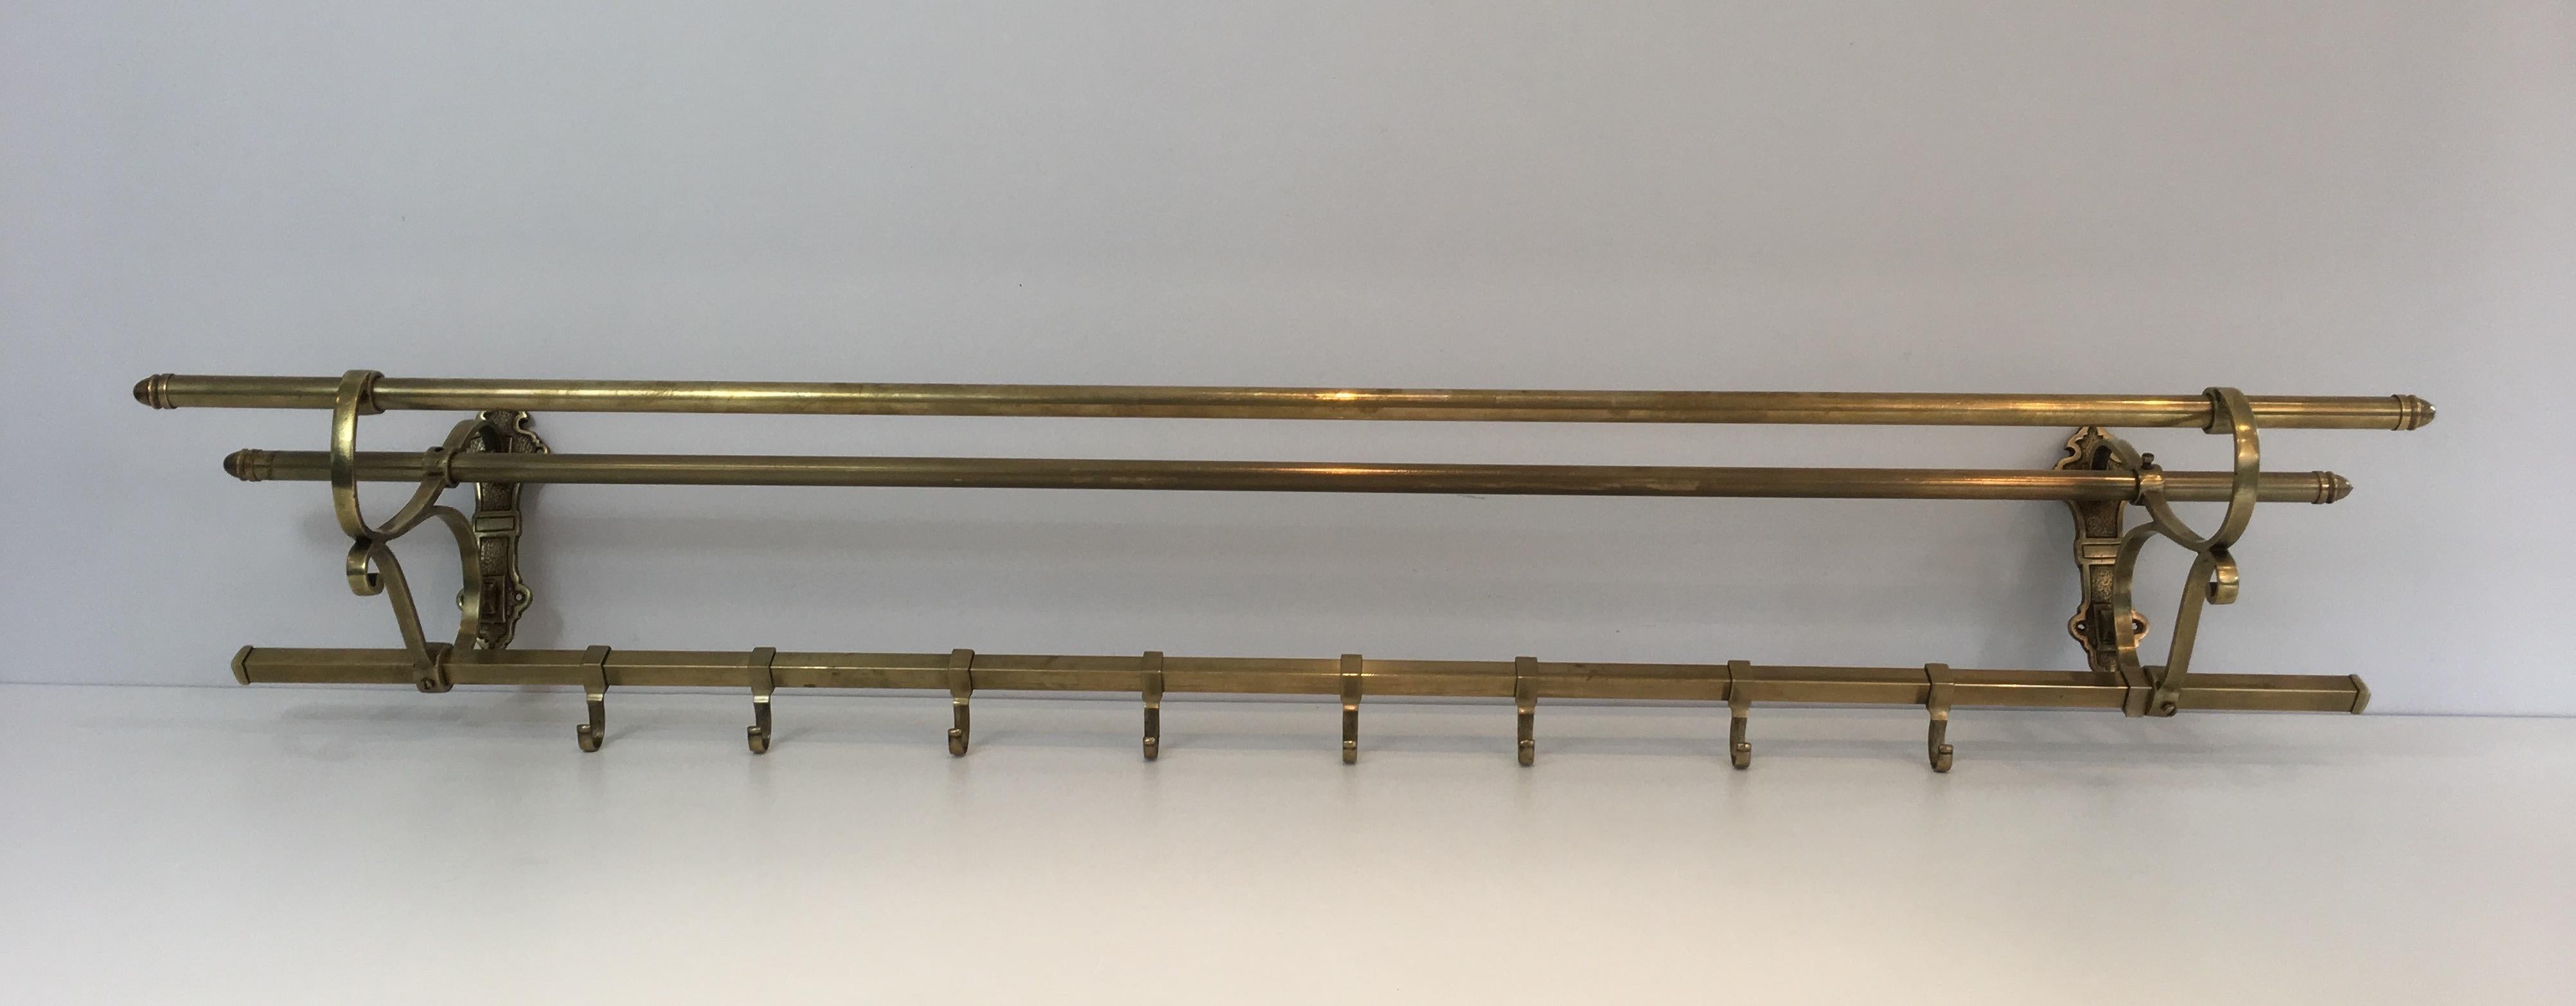 This large wall coat hanger and hat holder is all made of brass. This is a French work, circa 1900.